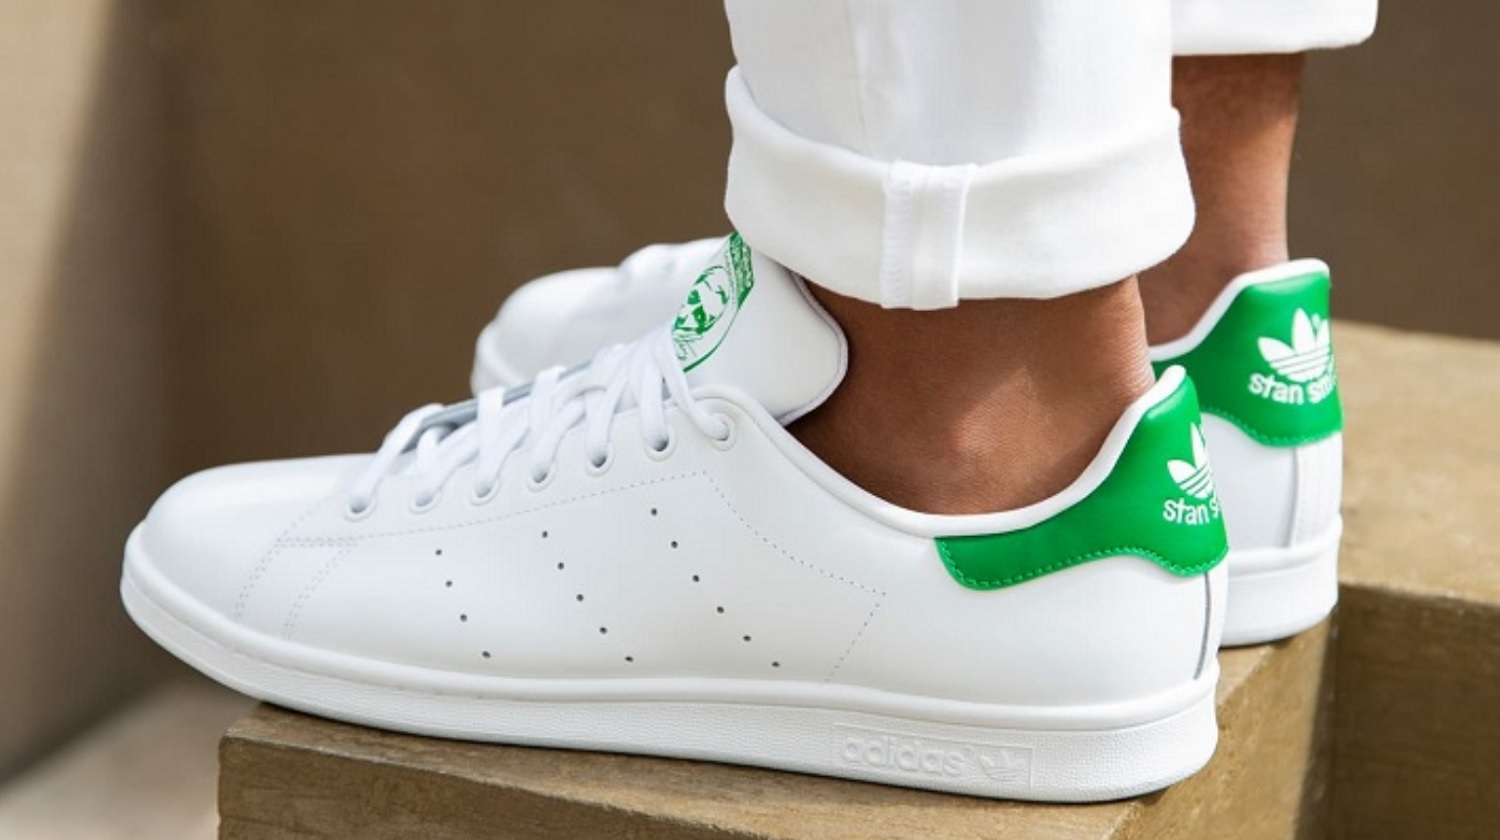 Stan Smith and Superstar Sales are Slowing, but Adidas Shouldn't